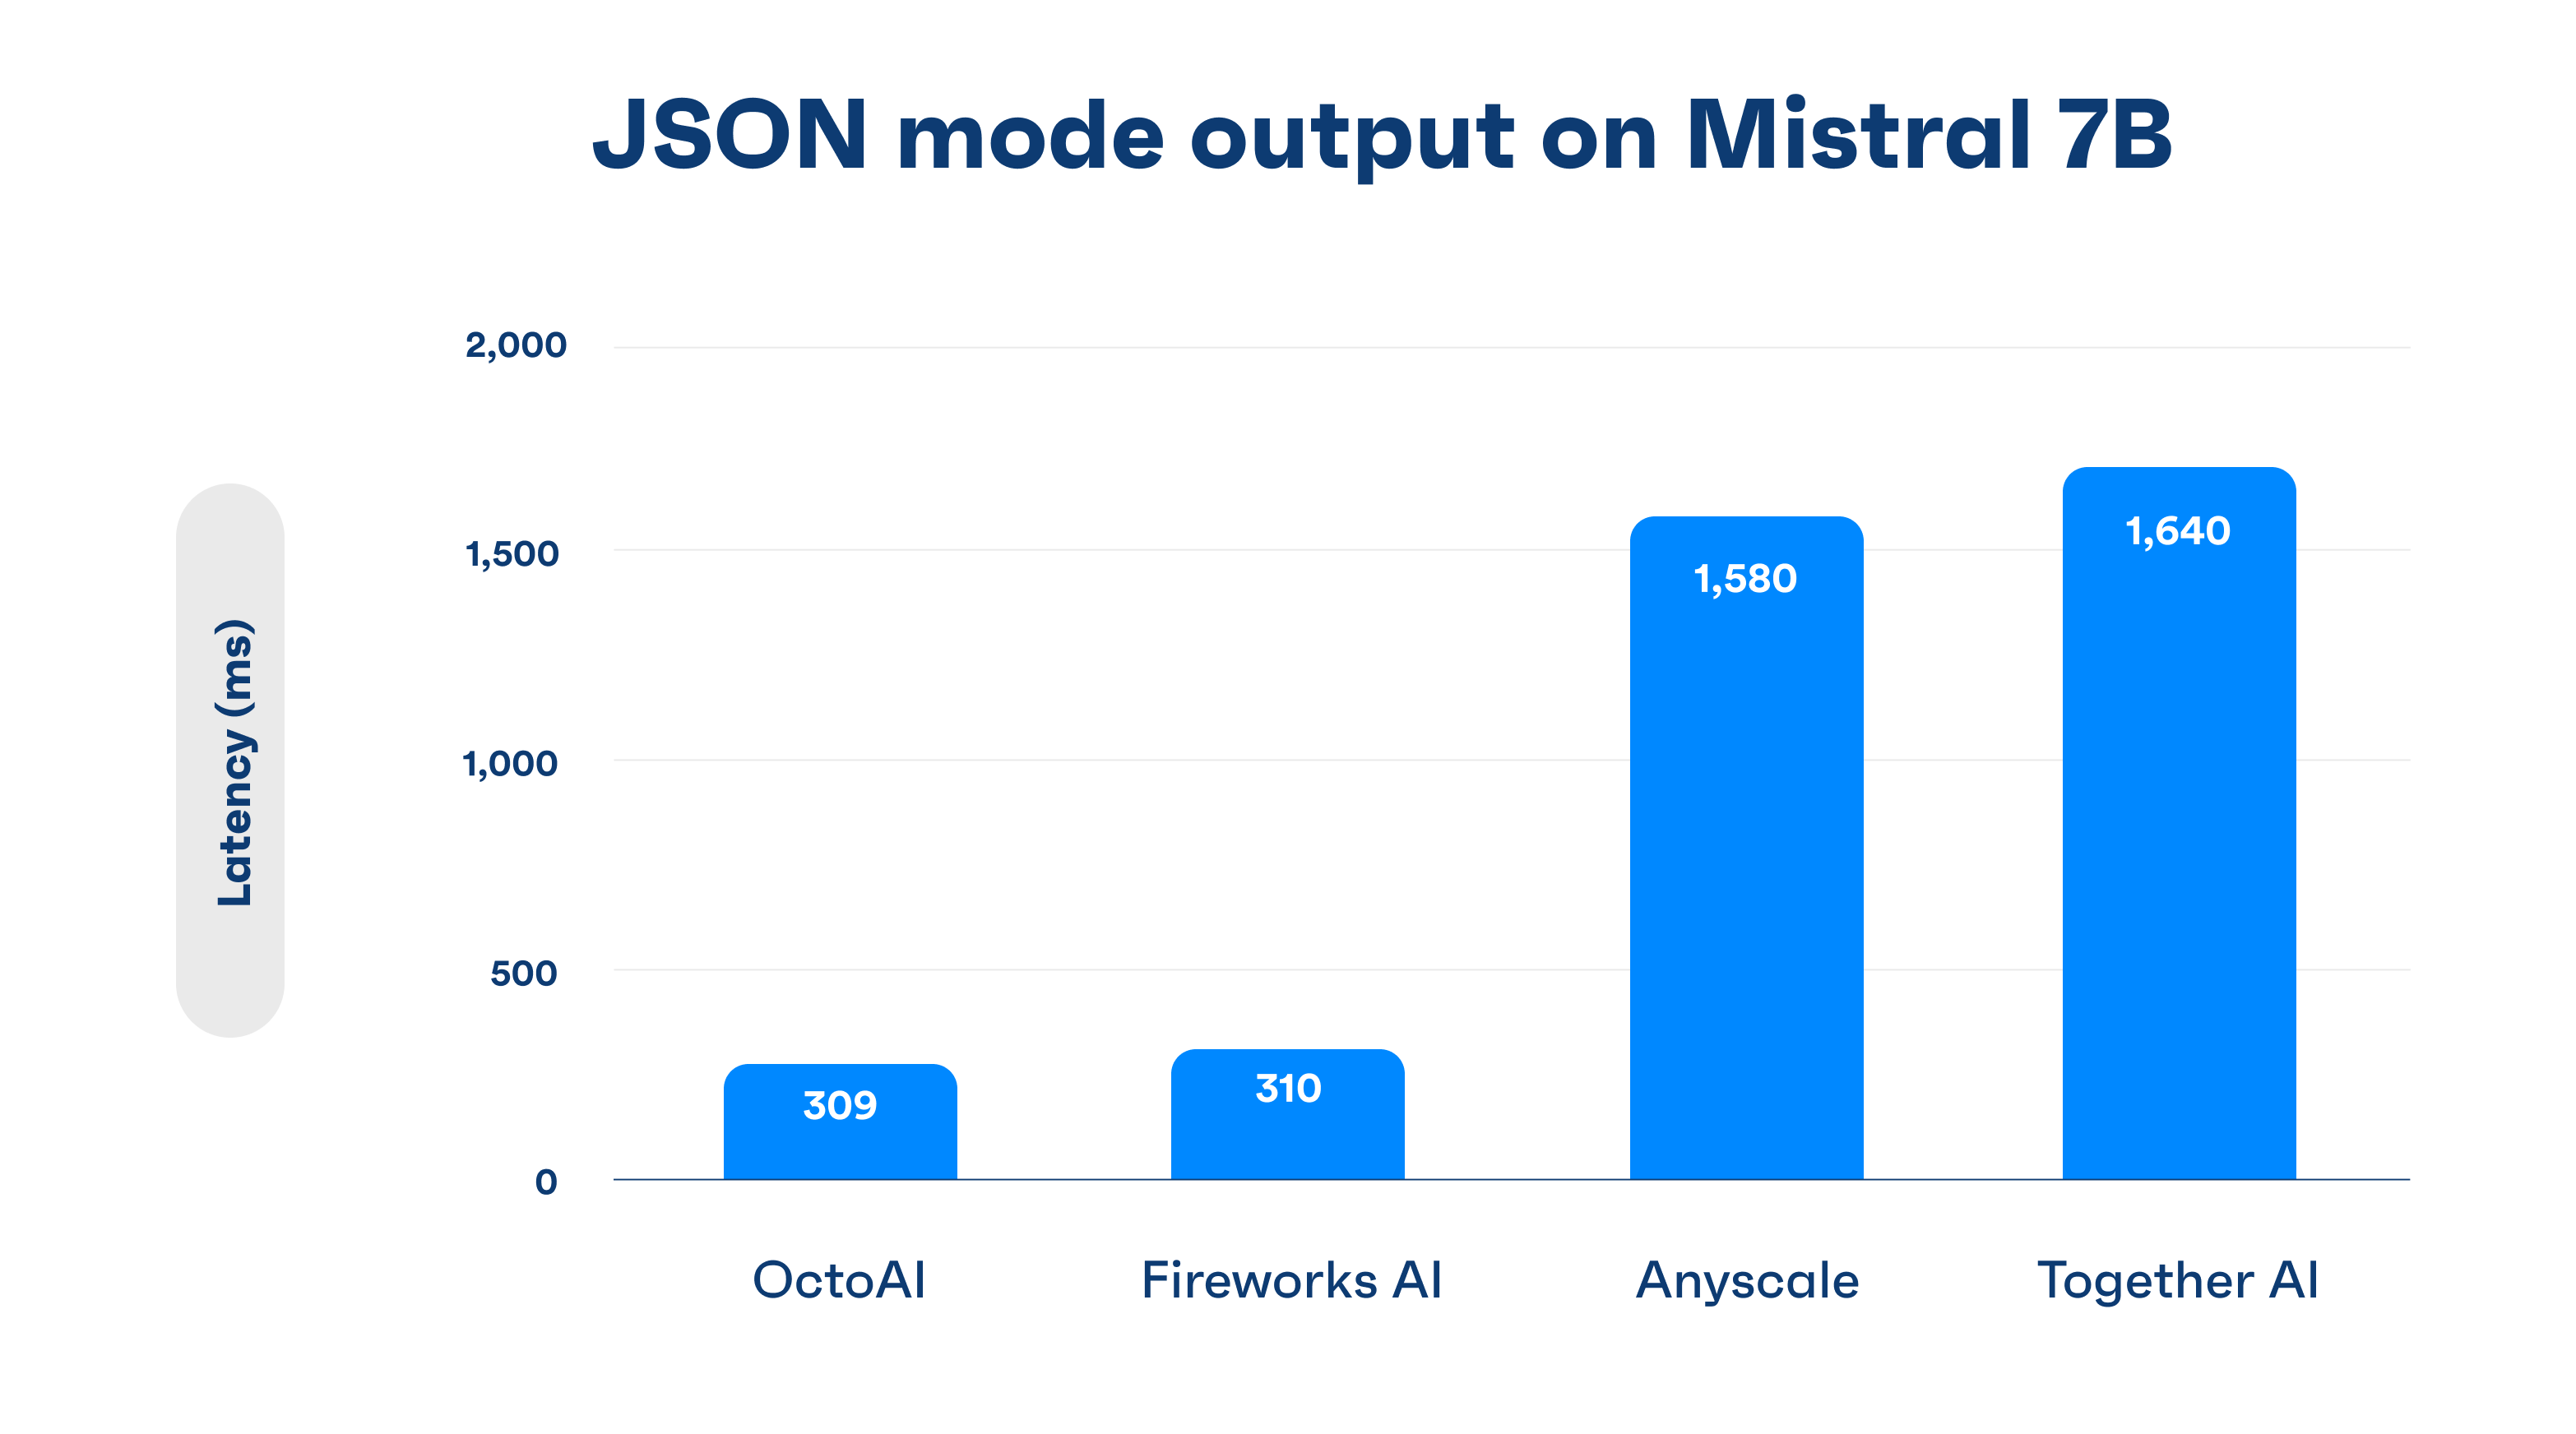 JSON mode chart of output in latency miliseconds, with OctoAI at 309 ms, Fireworks AI at 310 ms, Anyscale at 1580 ms, and Together AI at 1640 ms